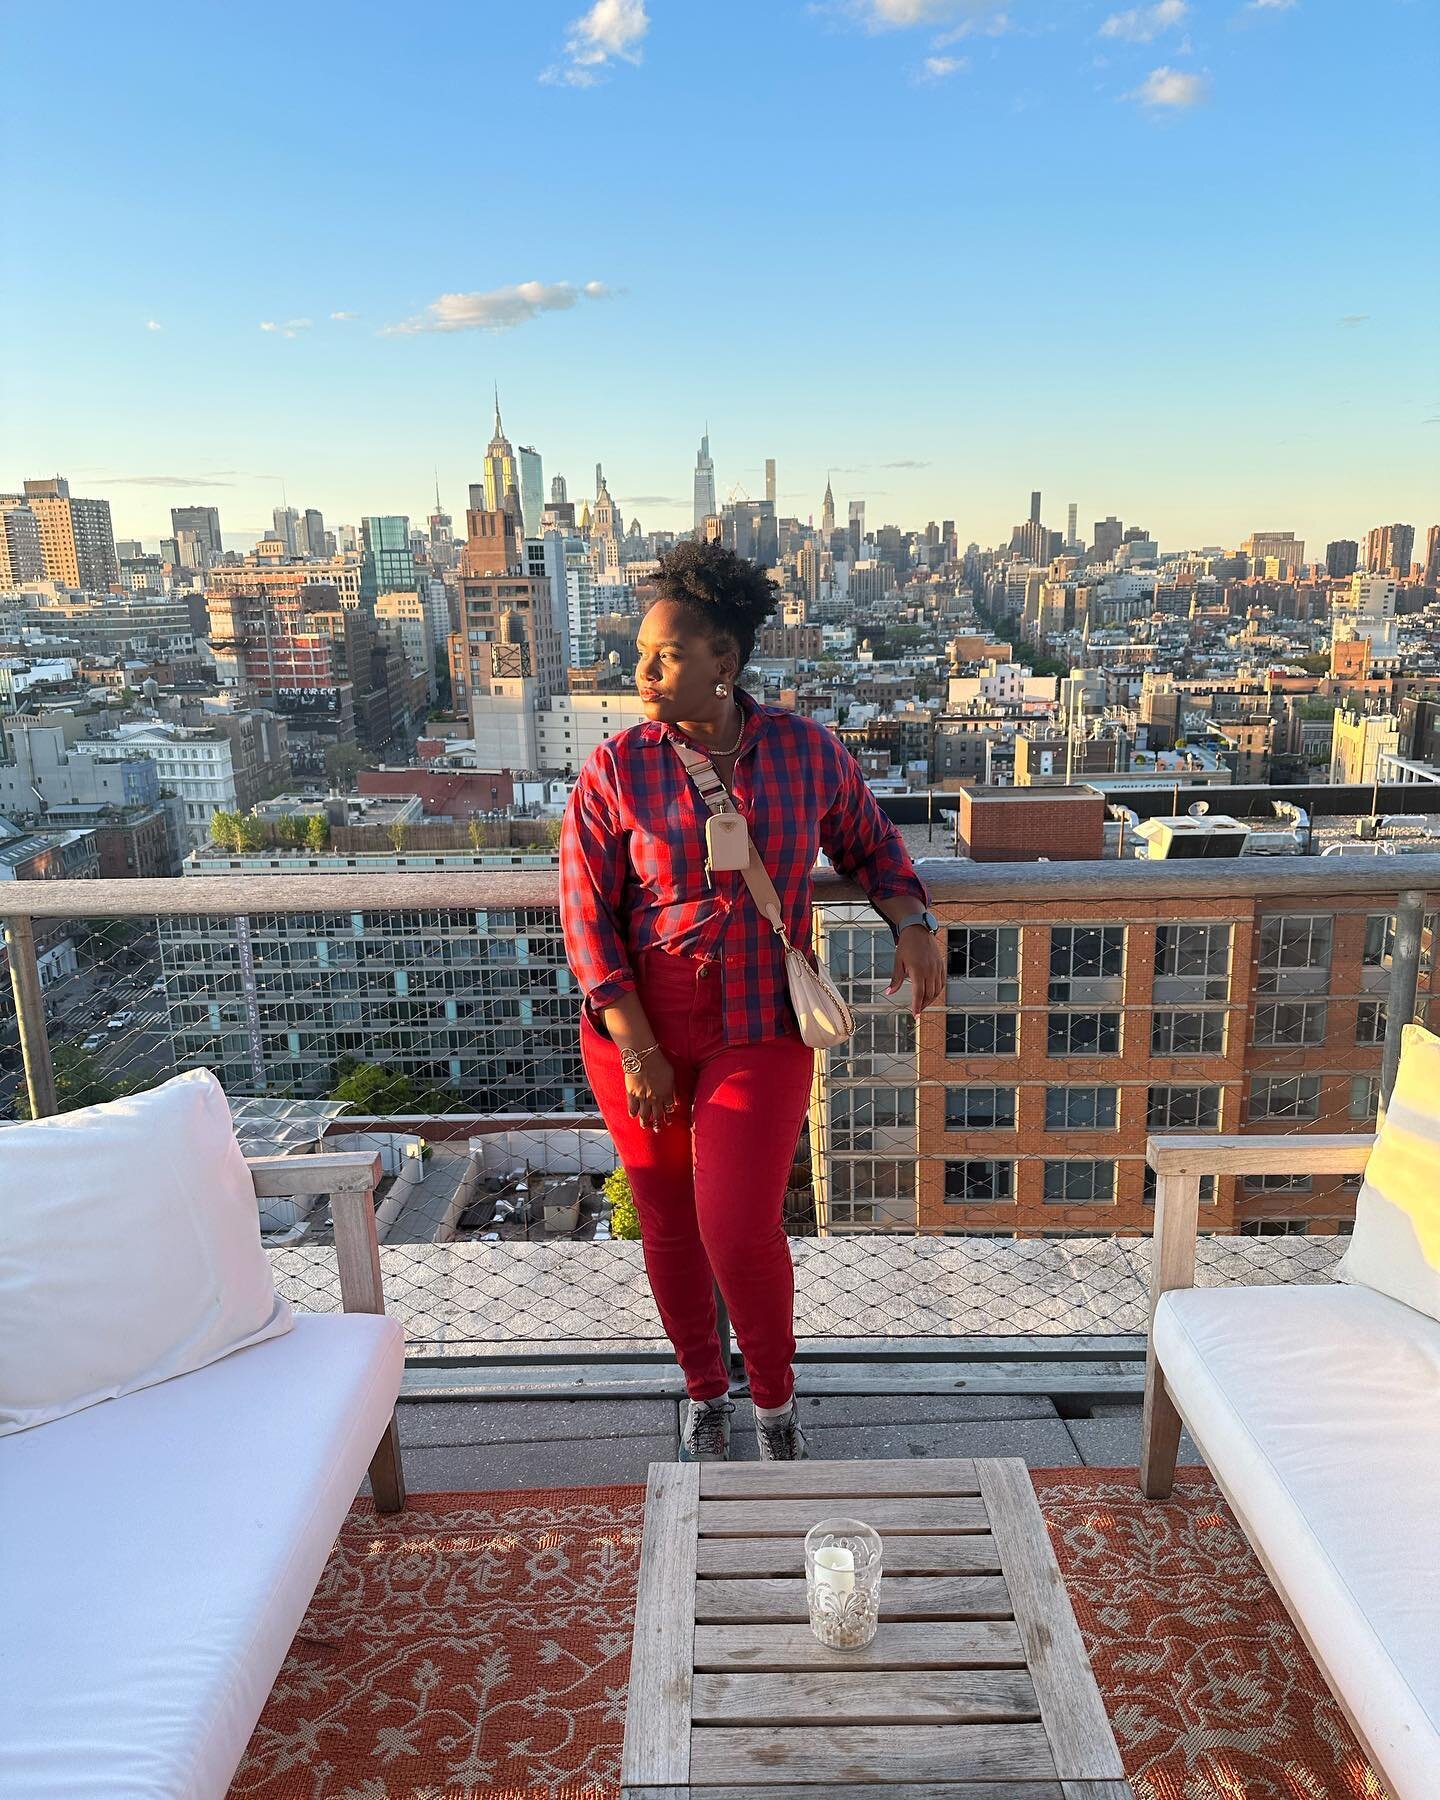 It&rsquo;s rooftop season and @publichotels invited me for the opening of &ldquo;The Roof&rdquo; with some of the best panoramic views of the city ! ⁣
⁣
Checkout this cute and chic rooftop if you&rsquo;re near The Lower East Side. ⁣
⁣
#nyclifestylecr